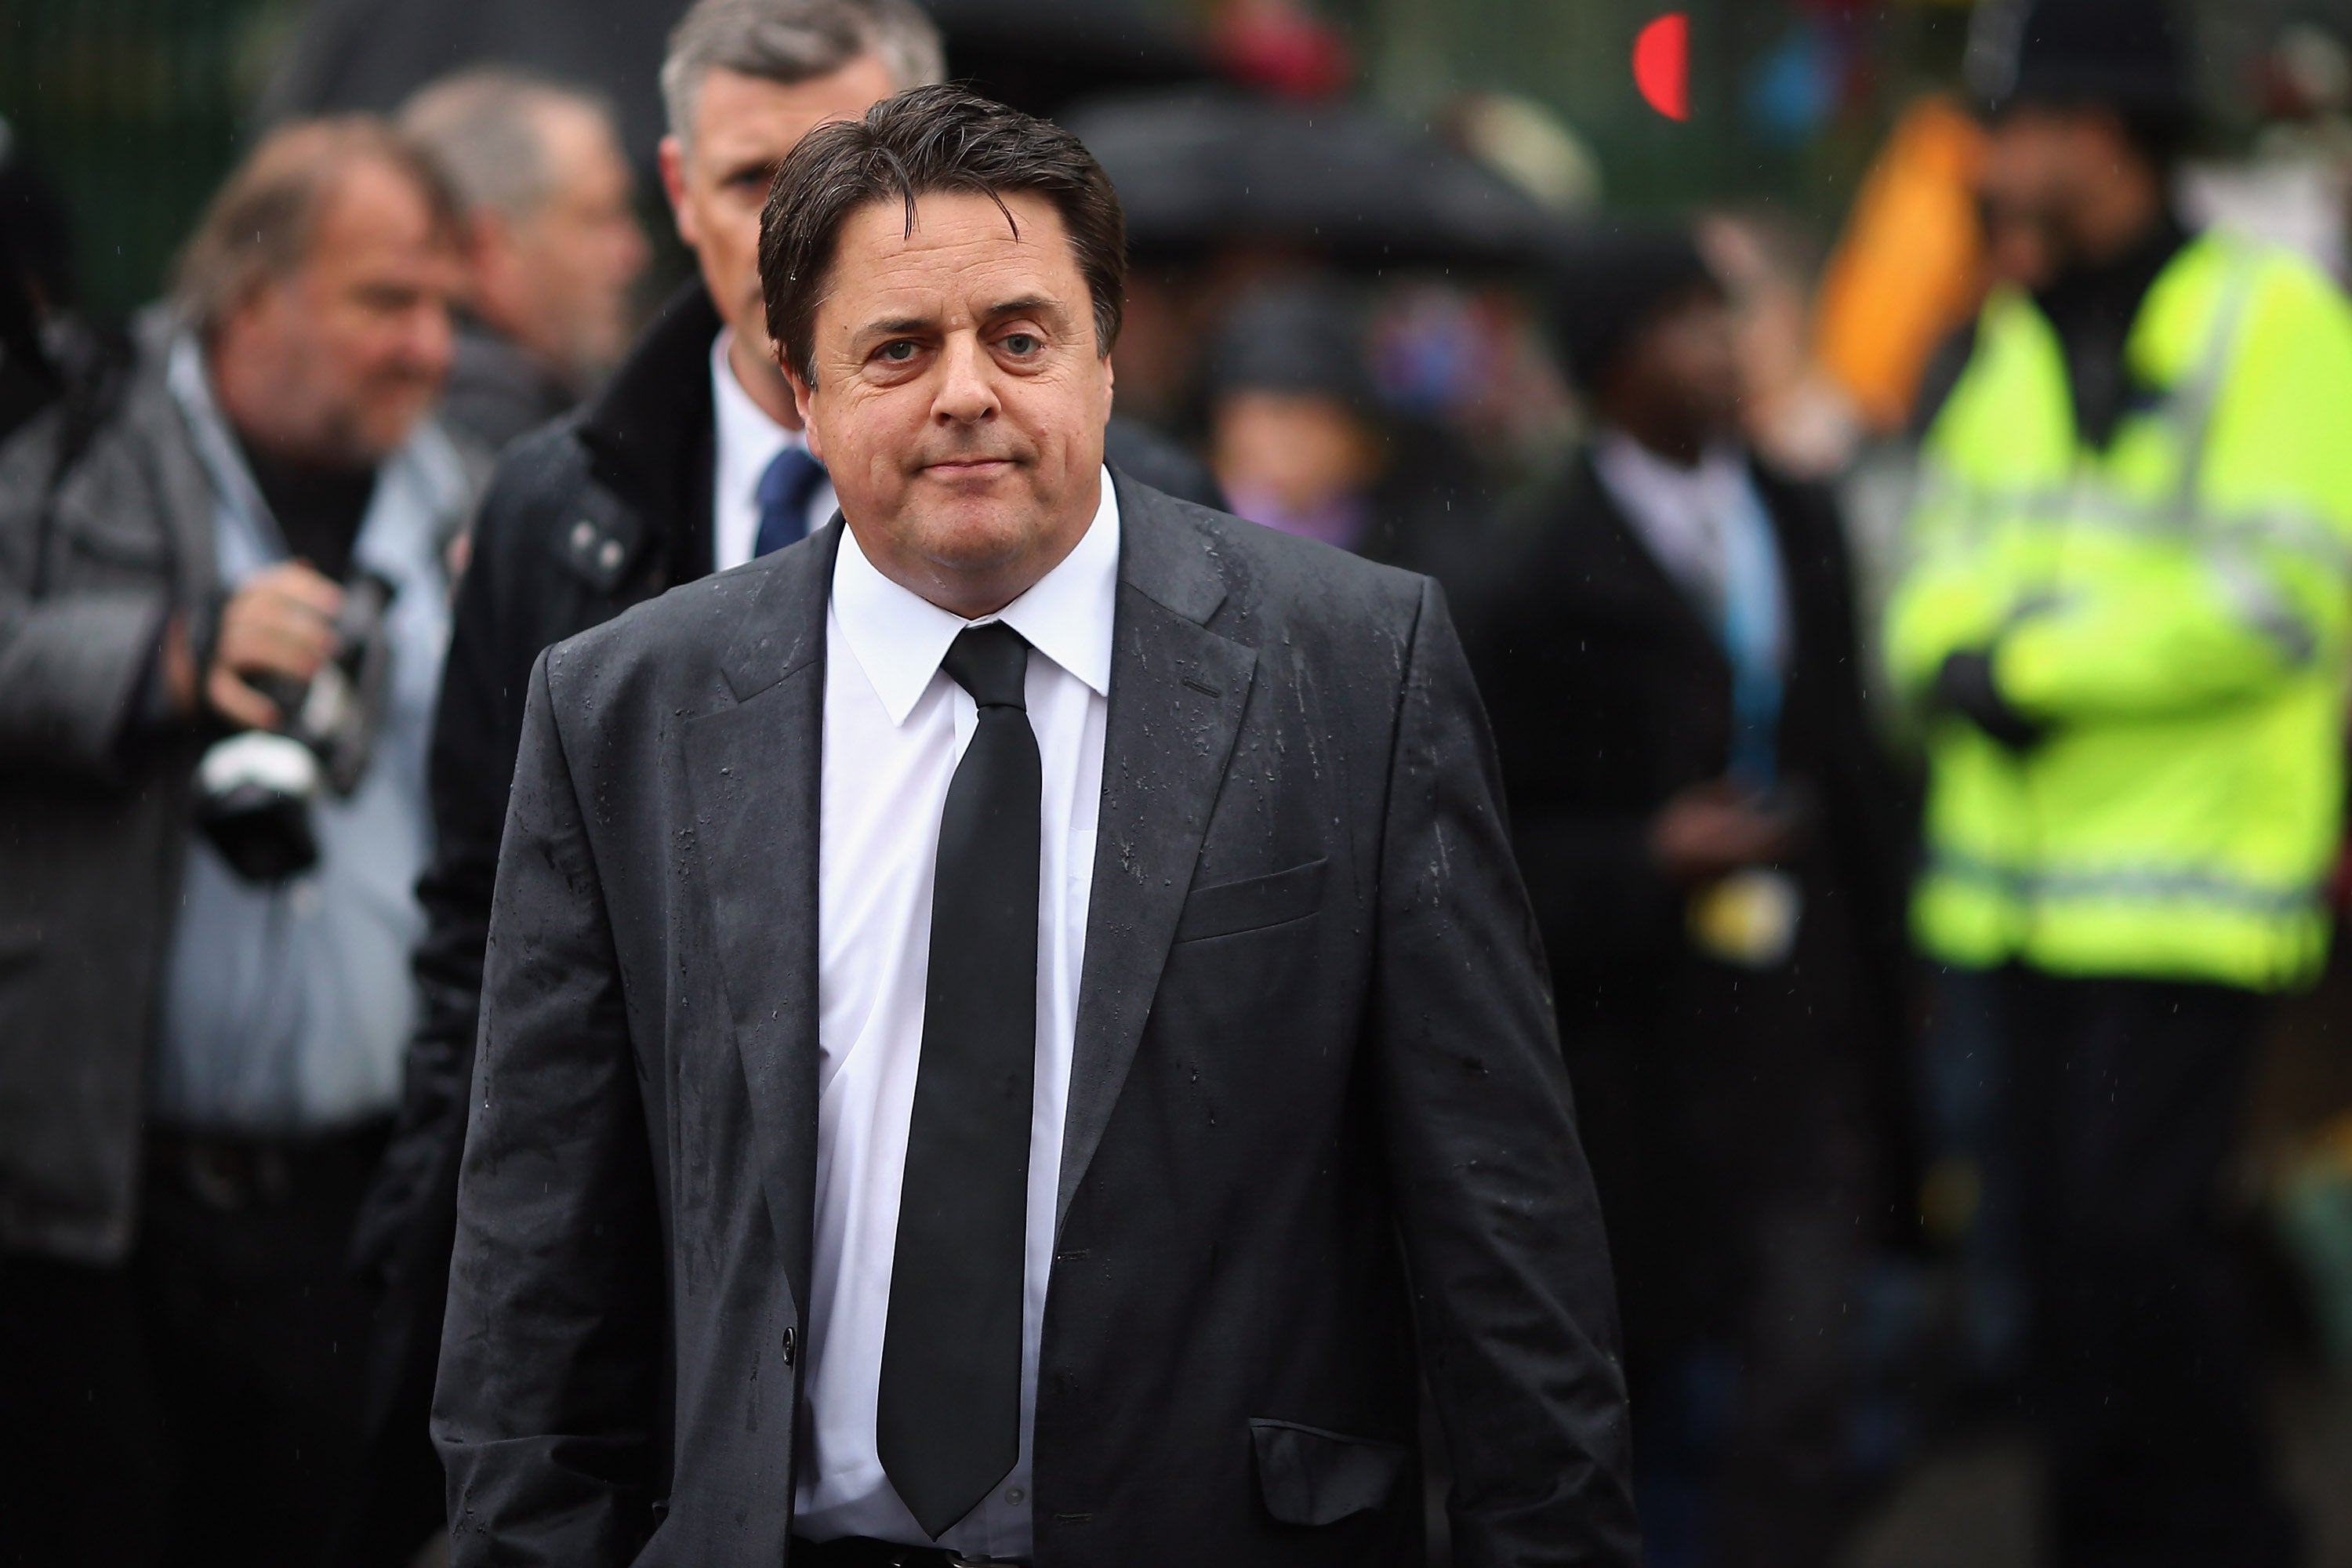 British National Party (BNP) leader Nick Griffin arrives to lay flowers close to the scene where Drummer Lee Rigby of the 2nd Battalion the Royal Regiment of Fusiliers was killed, on May 24, 2013 in London, England. (Photo by Dan Kitwood/Getty Images)